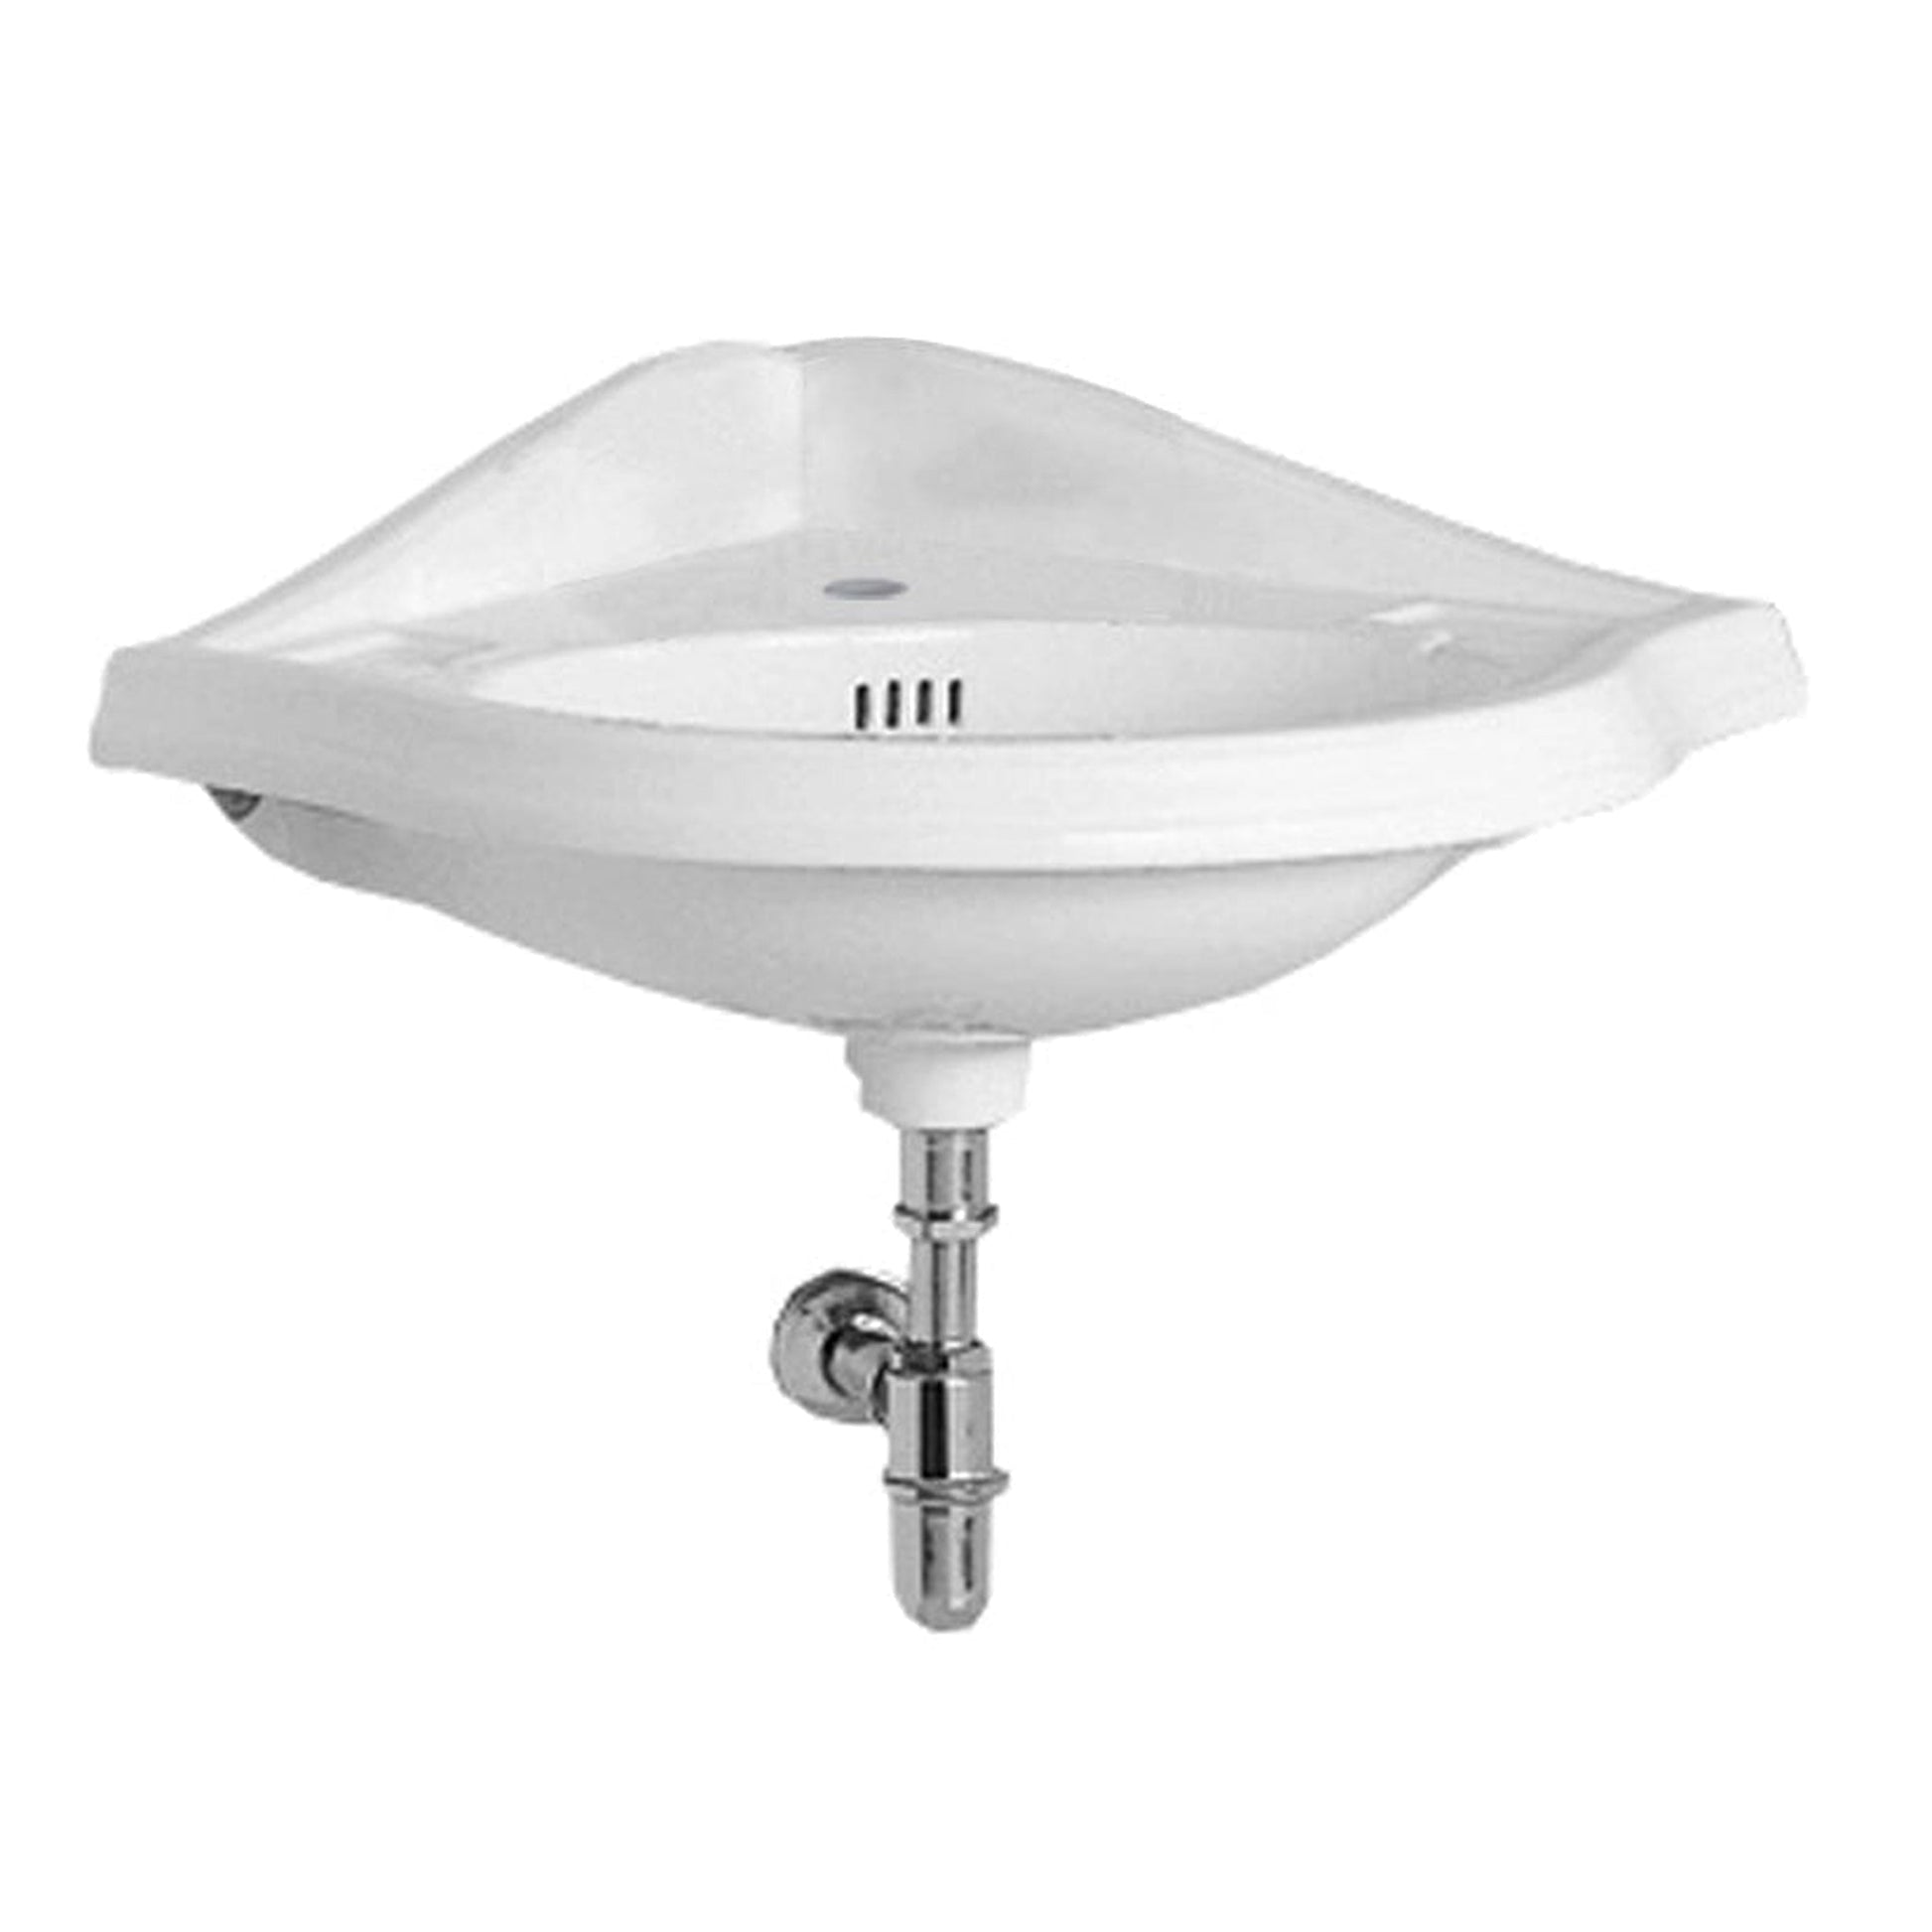 Whitehaus Isabella AR884-1H White Corner Wall Mount Basin With Single Hole Faucet Drilling Oval Bowl and Rear Center Drain